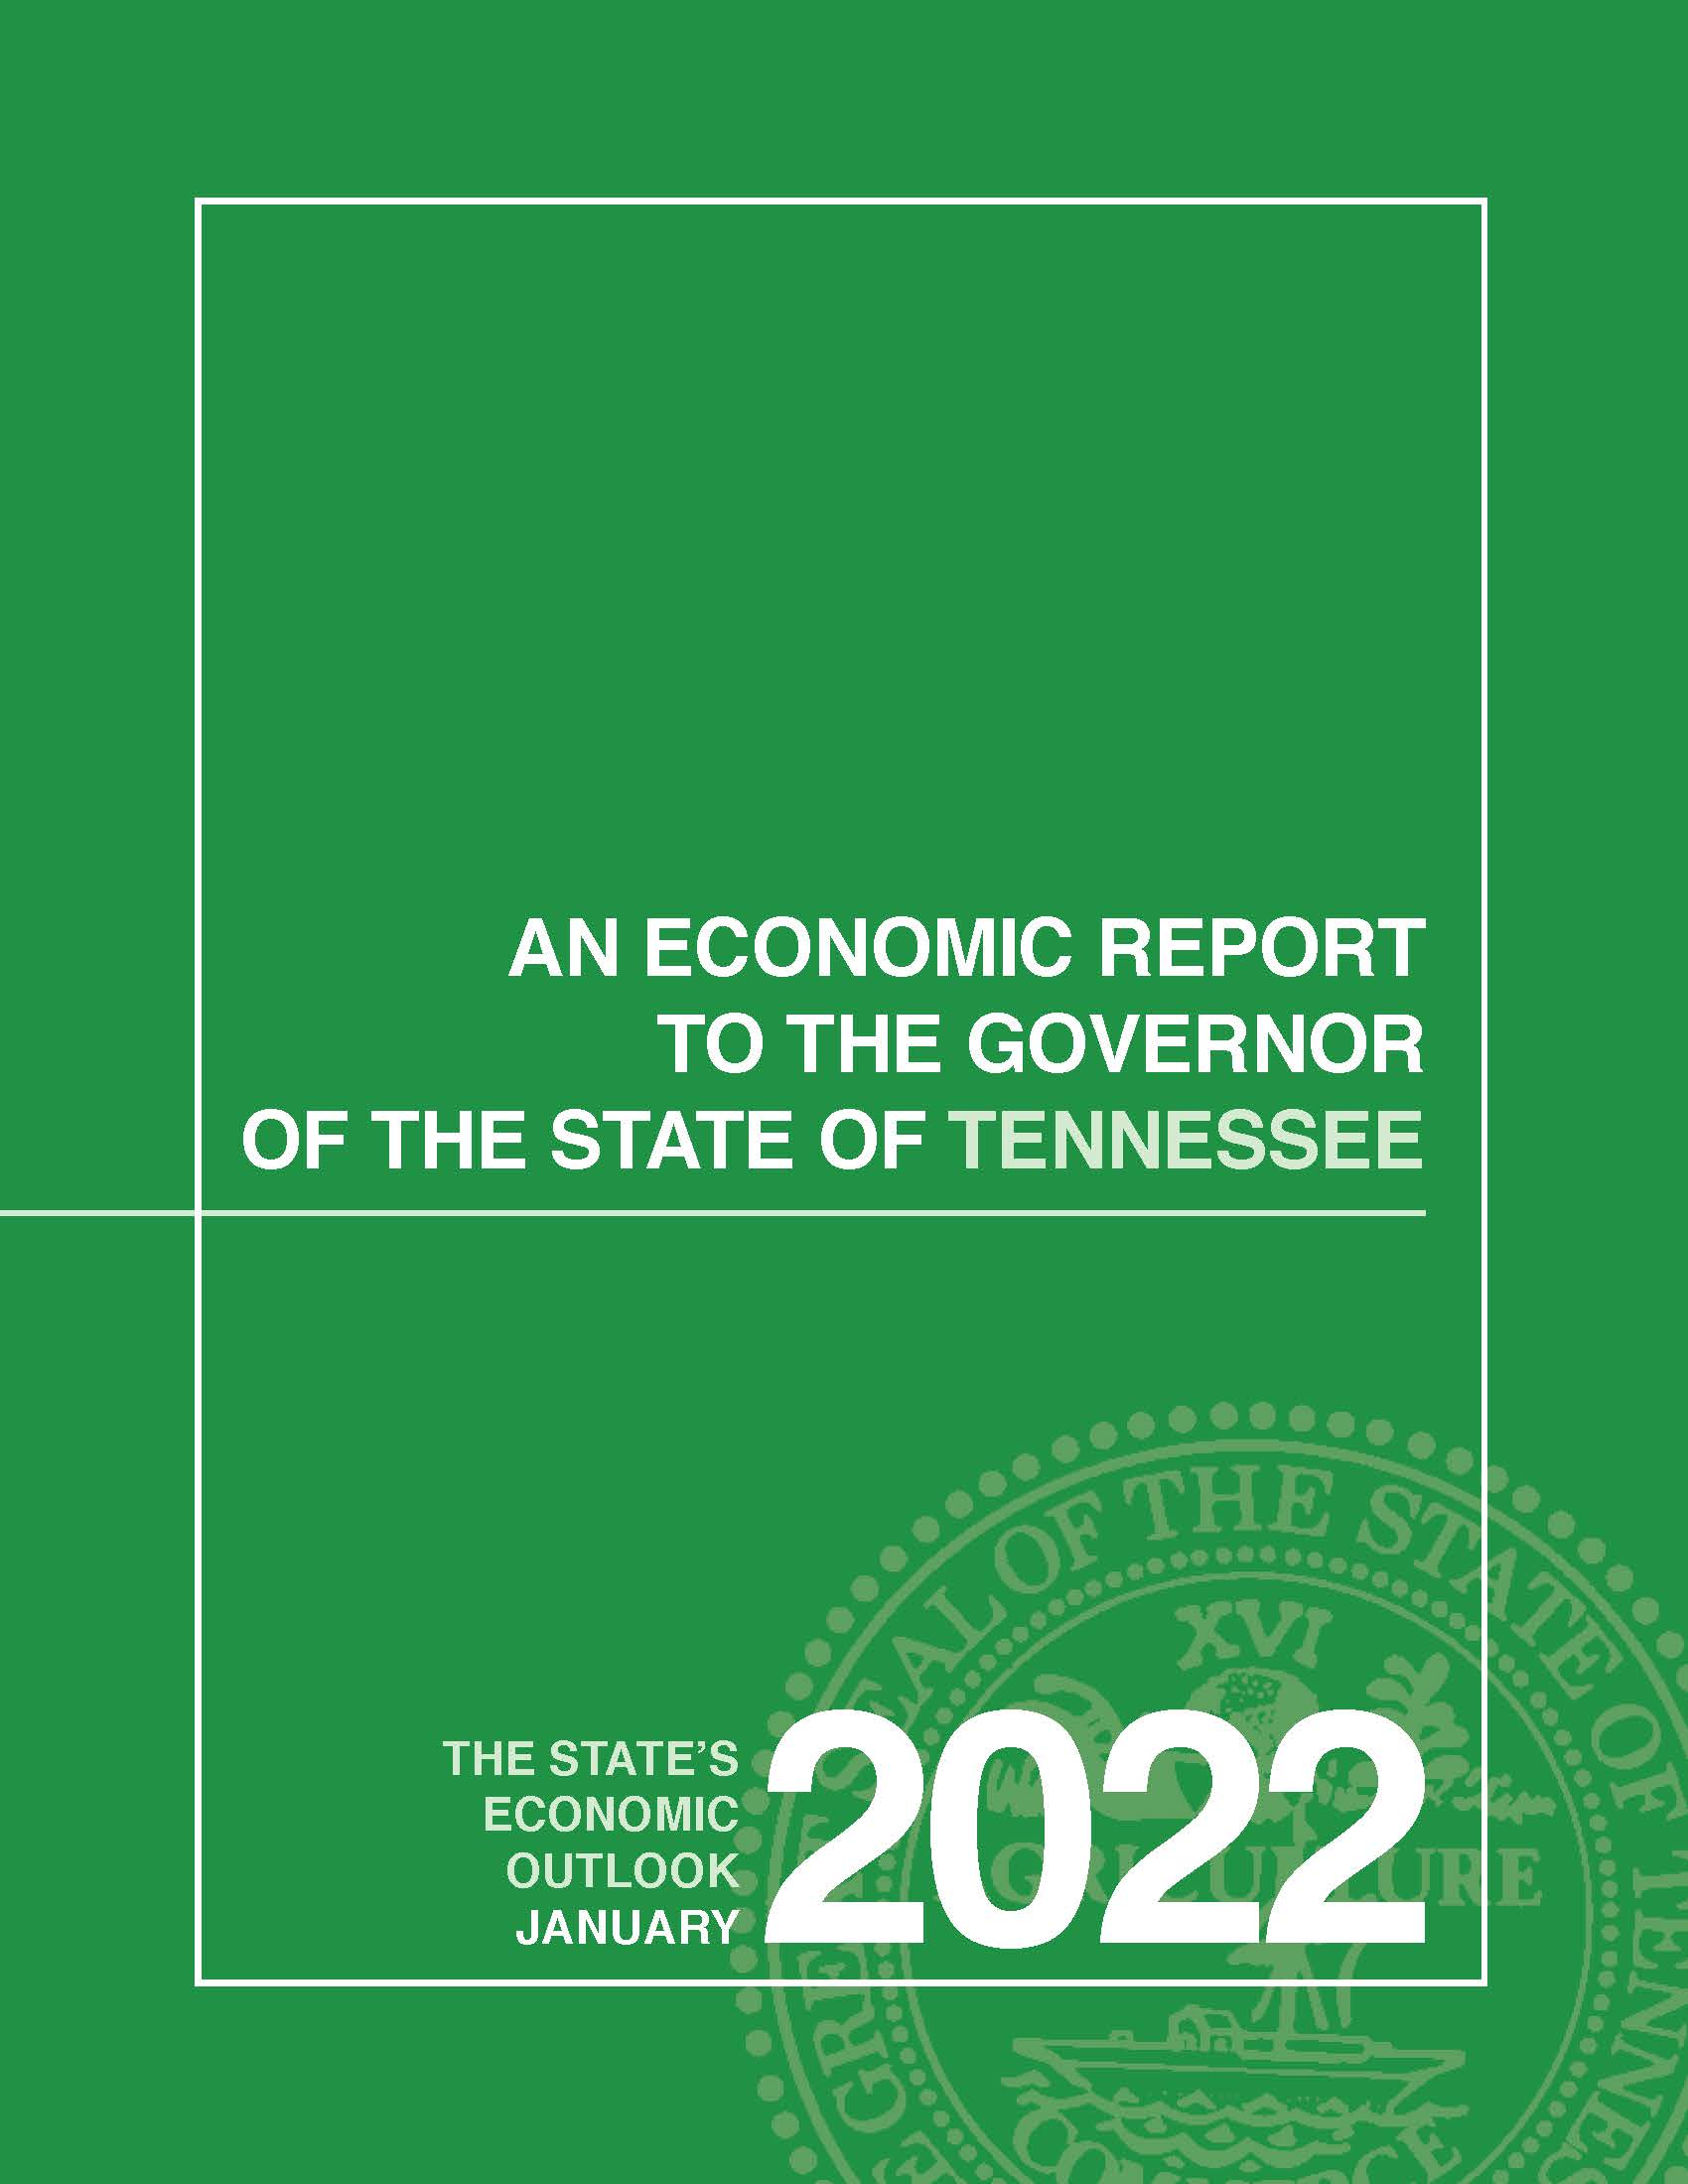 Economic Report to the Governor, 2022